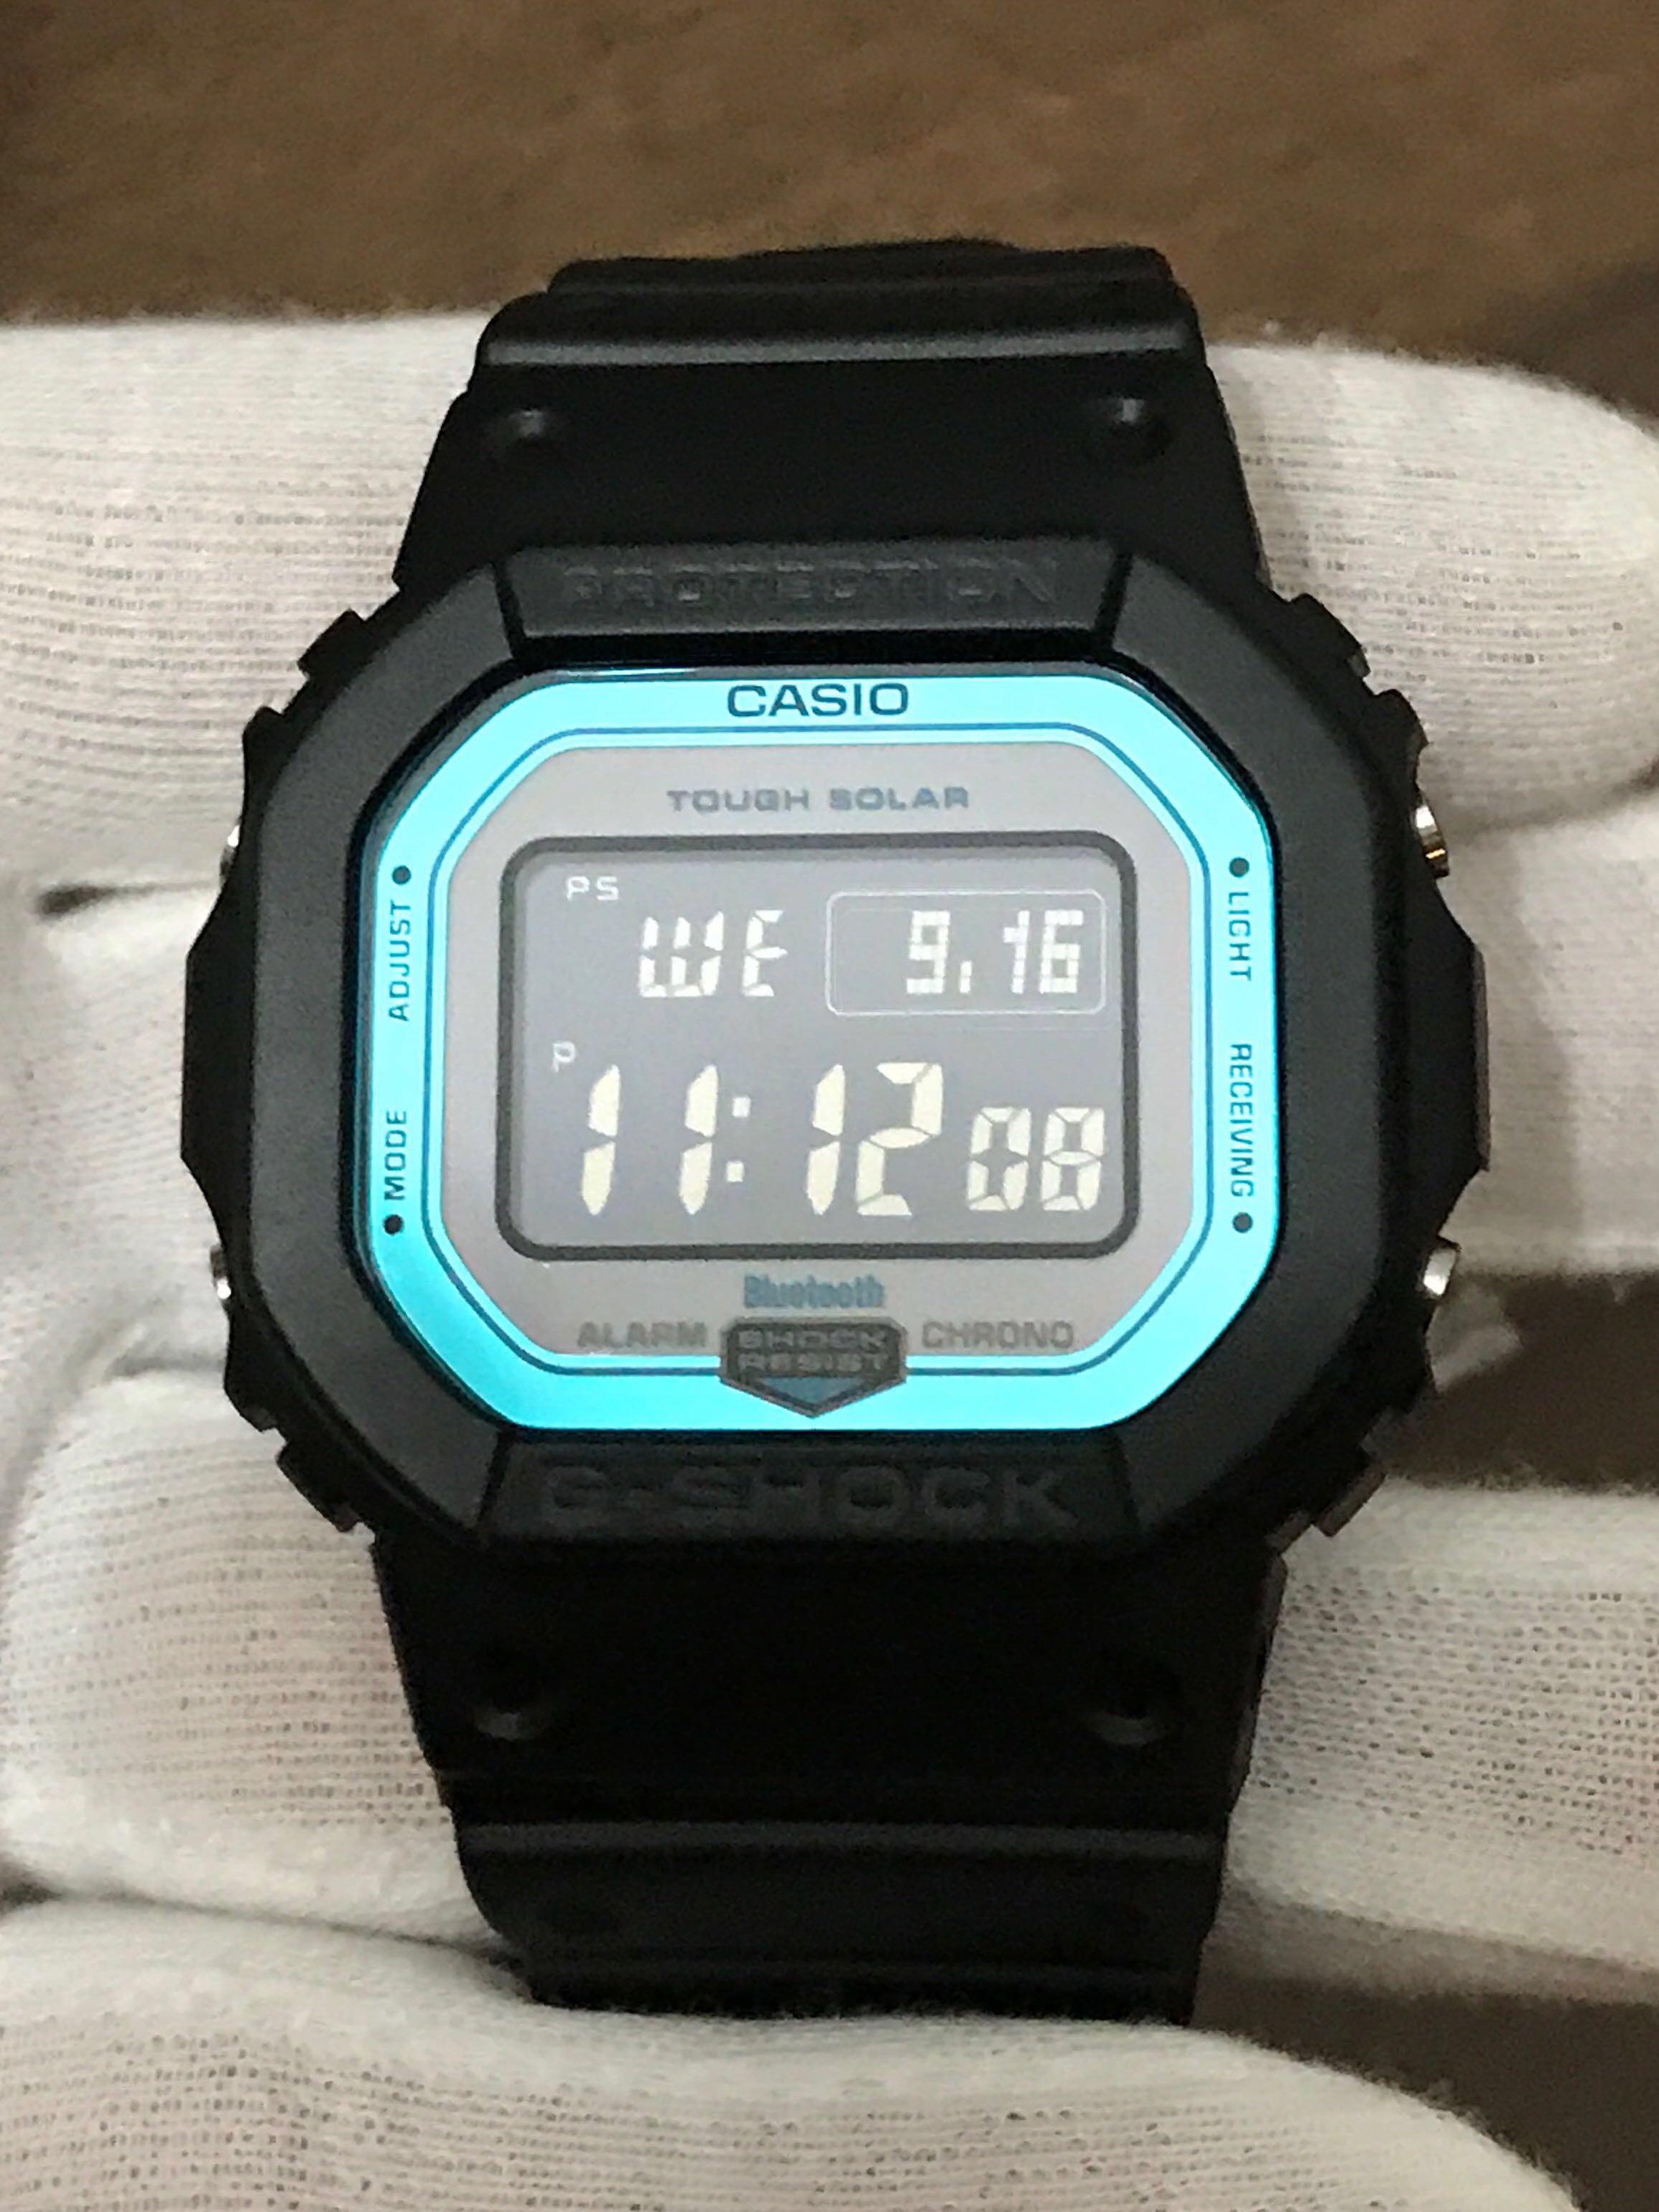 SOLD OUT ????????Casio G-Shock GW-B5600-2 Tough Solar Bluetooth Multiband Resin  Band GW-5600 GWB5600, Men's Fashion, Watches  Accessories, Watches on  Carousell